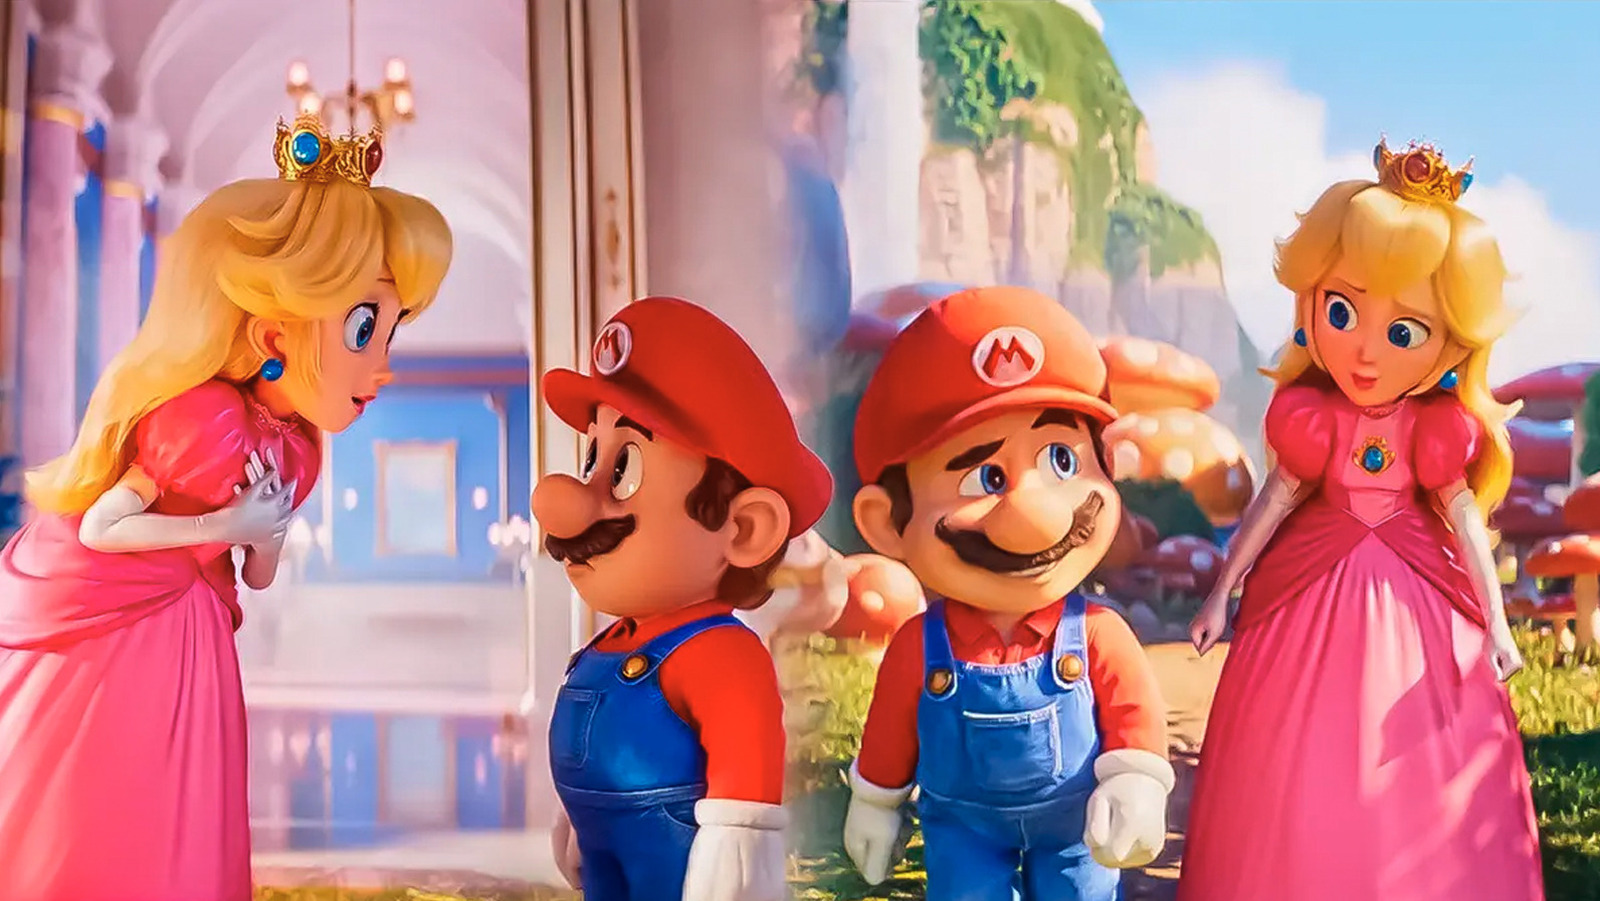 Why Peach Became A Princess Instead Of A Queen In Super Mario Bros